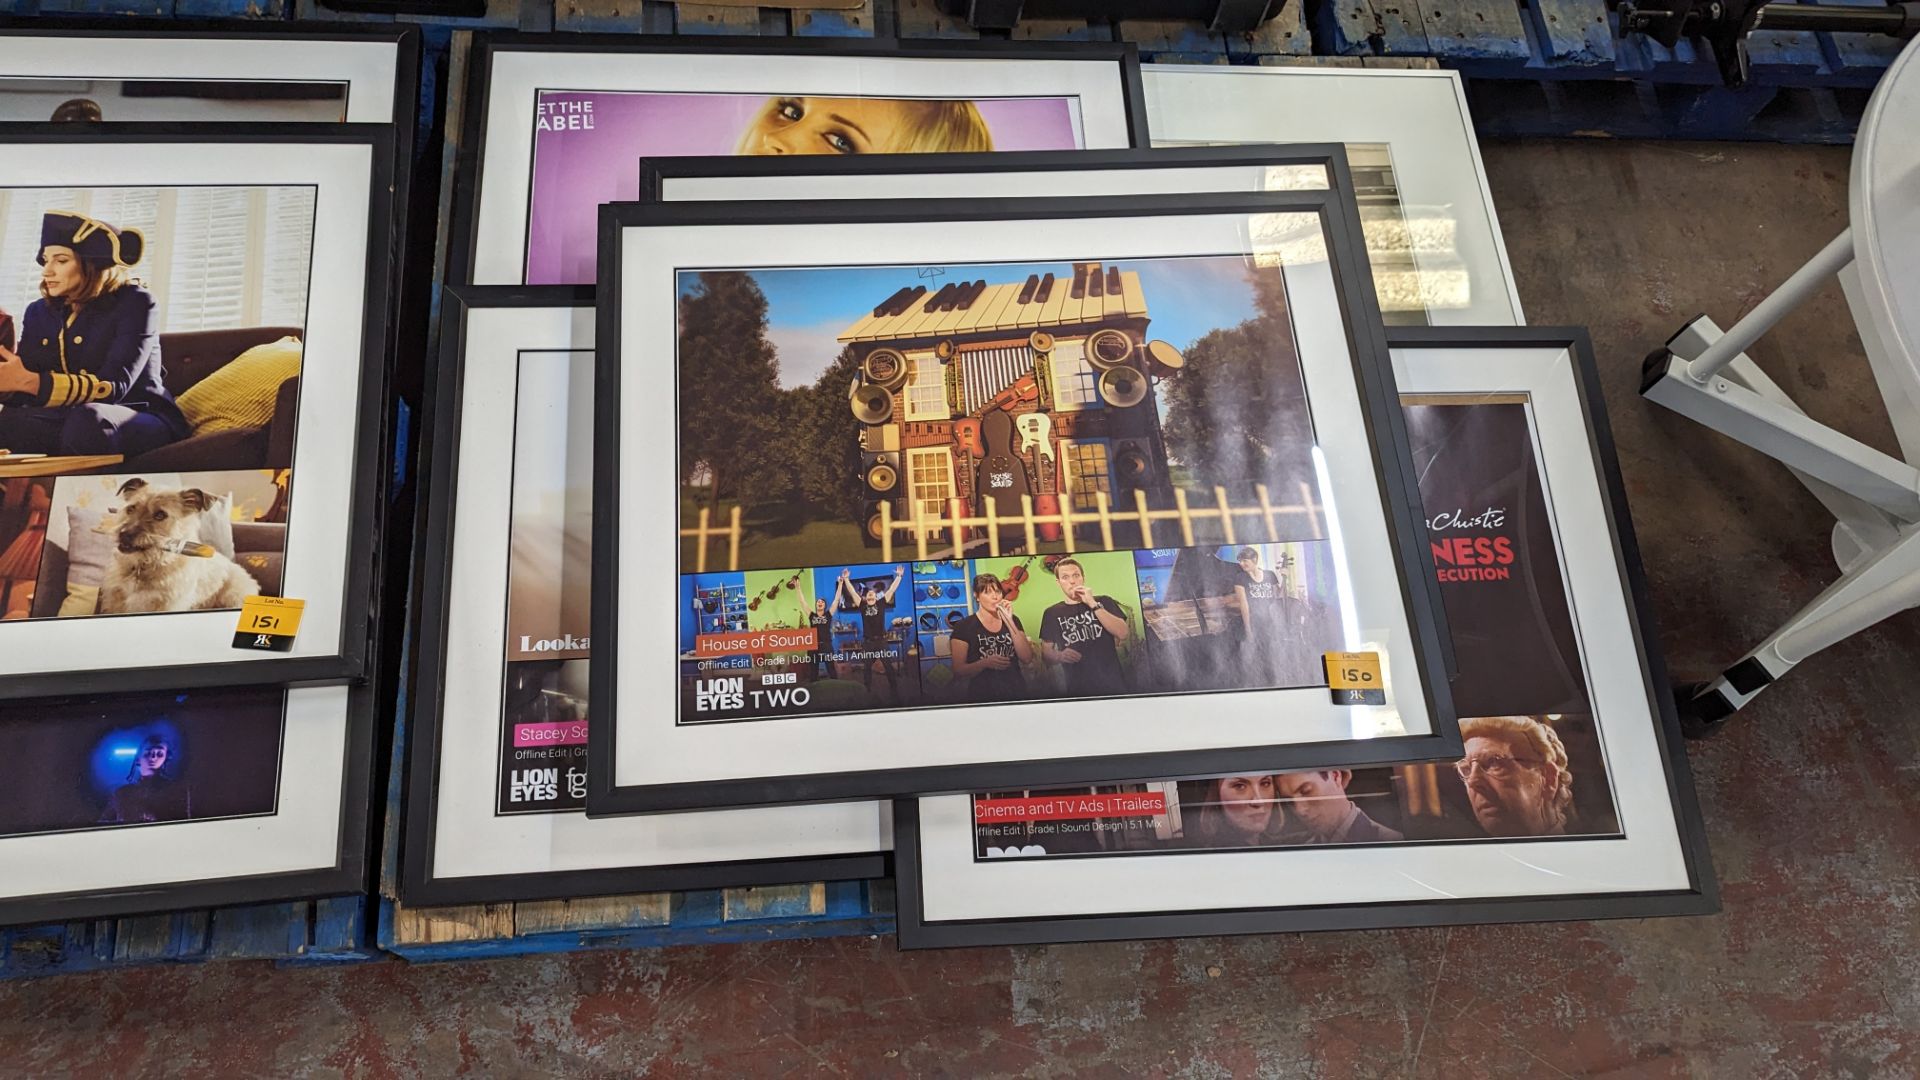 6 off framed pictures - the contents of a pallet - Image 4 of 9